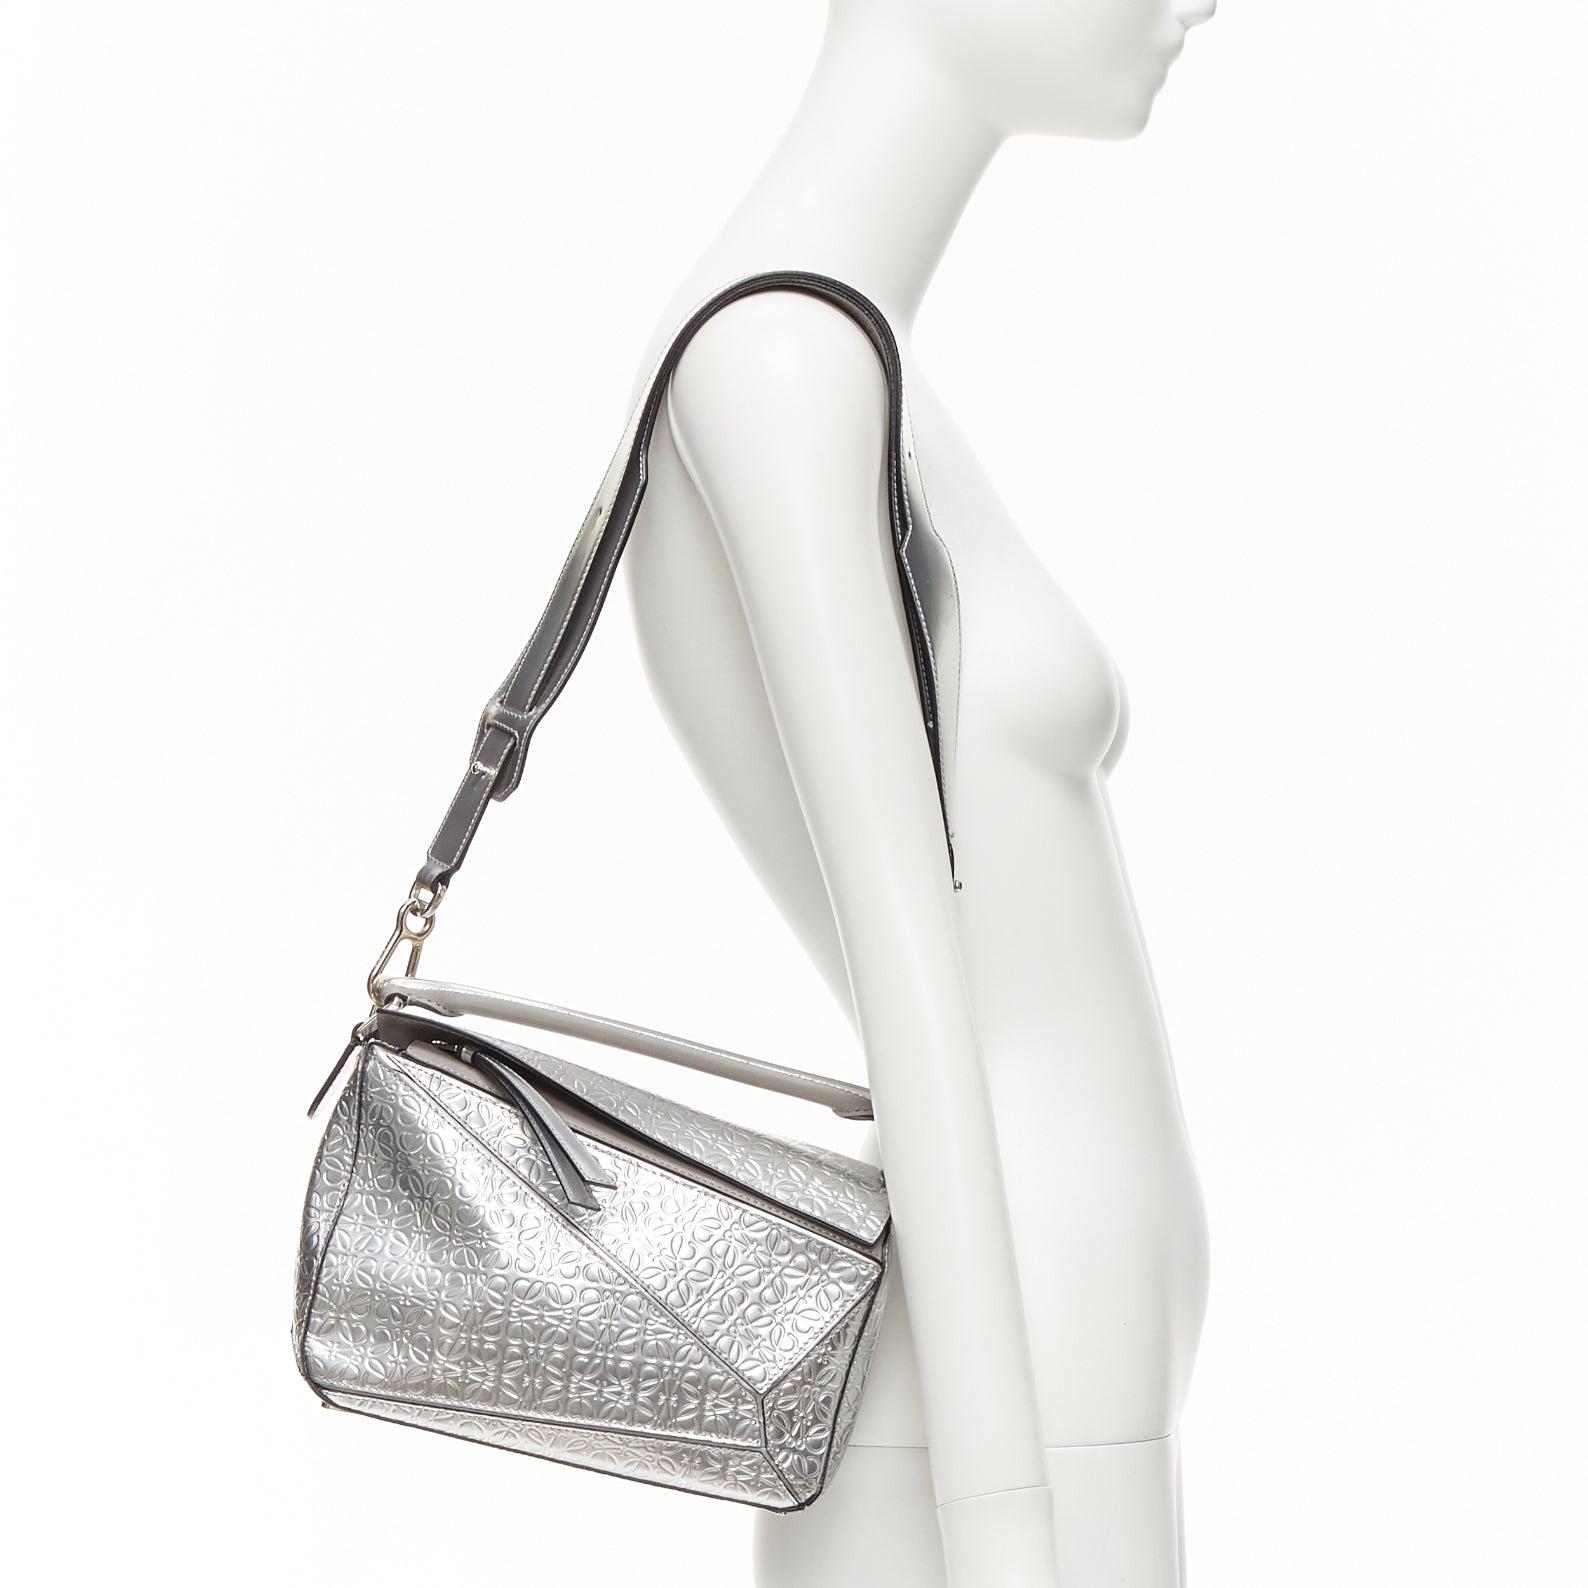 LOEWE Small Puzzle metallic silver calfskin monogram embossed shoulder bag
Reference: NKLL/A00243
Brand: Loewe
Model: Puzzle Small
Material: Leather
Color: Silver, Grey
Pattern: Monogram
Closure: Zip
Lining: Grey Fabric
Extra Details: LOEWE Small